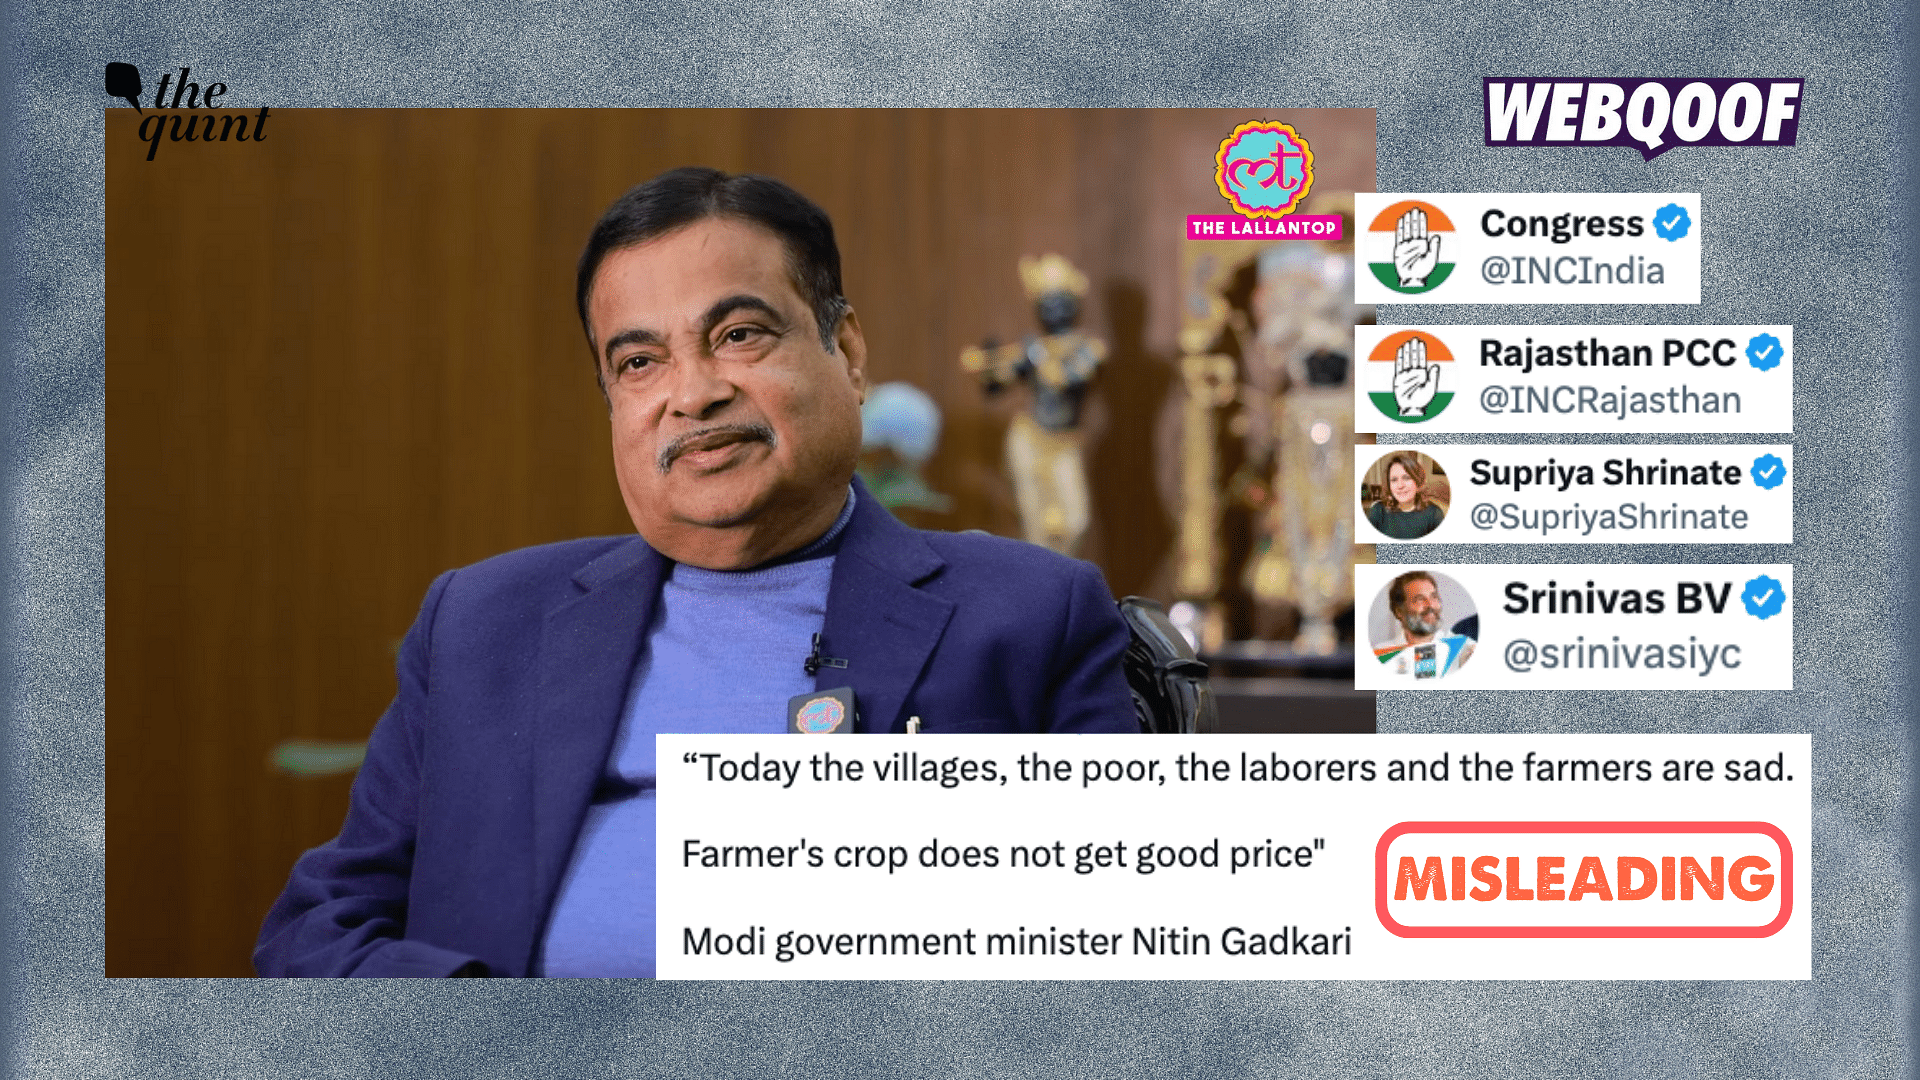 <div class="paragraphs"><p>Gadkari's statement was clipped and shared by several accounts associated with the Congress party.</p></div>